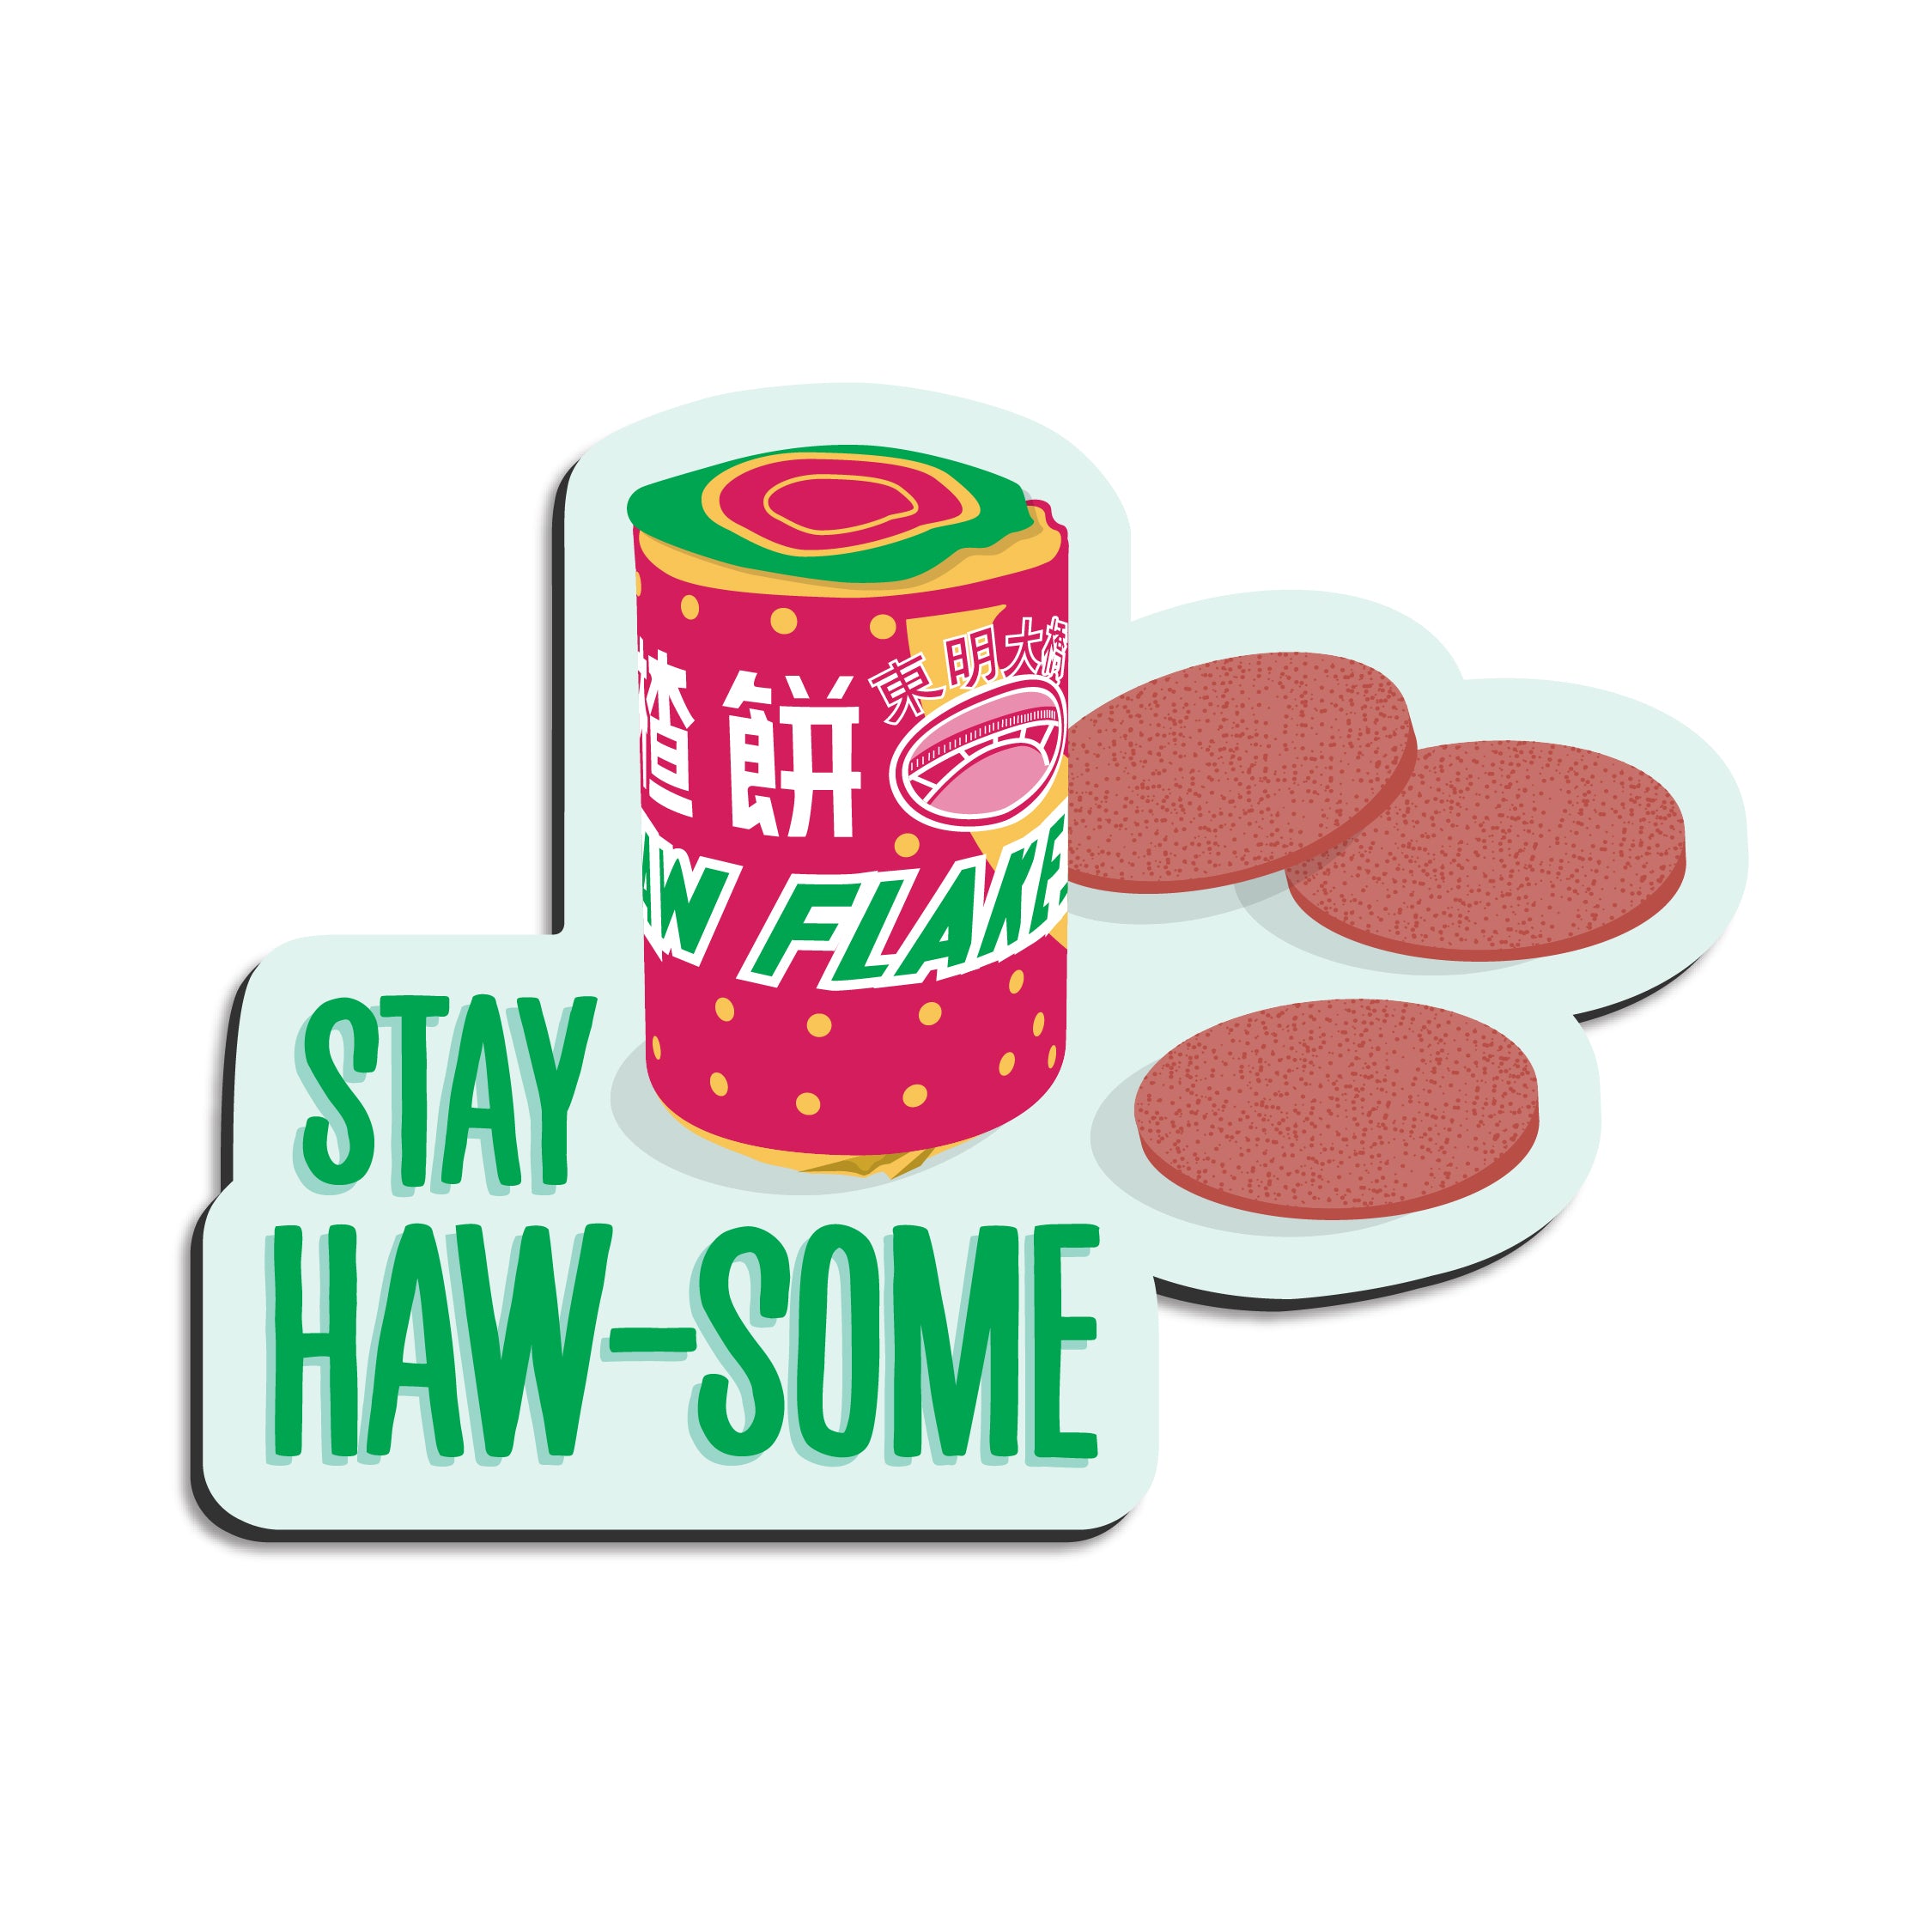 Stay haw-some haw flakes magnet